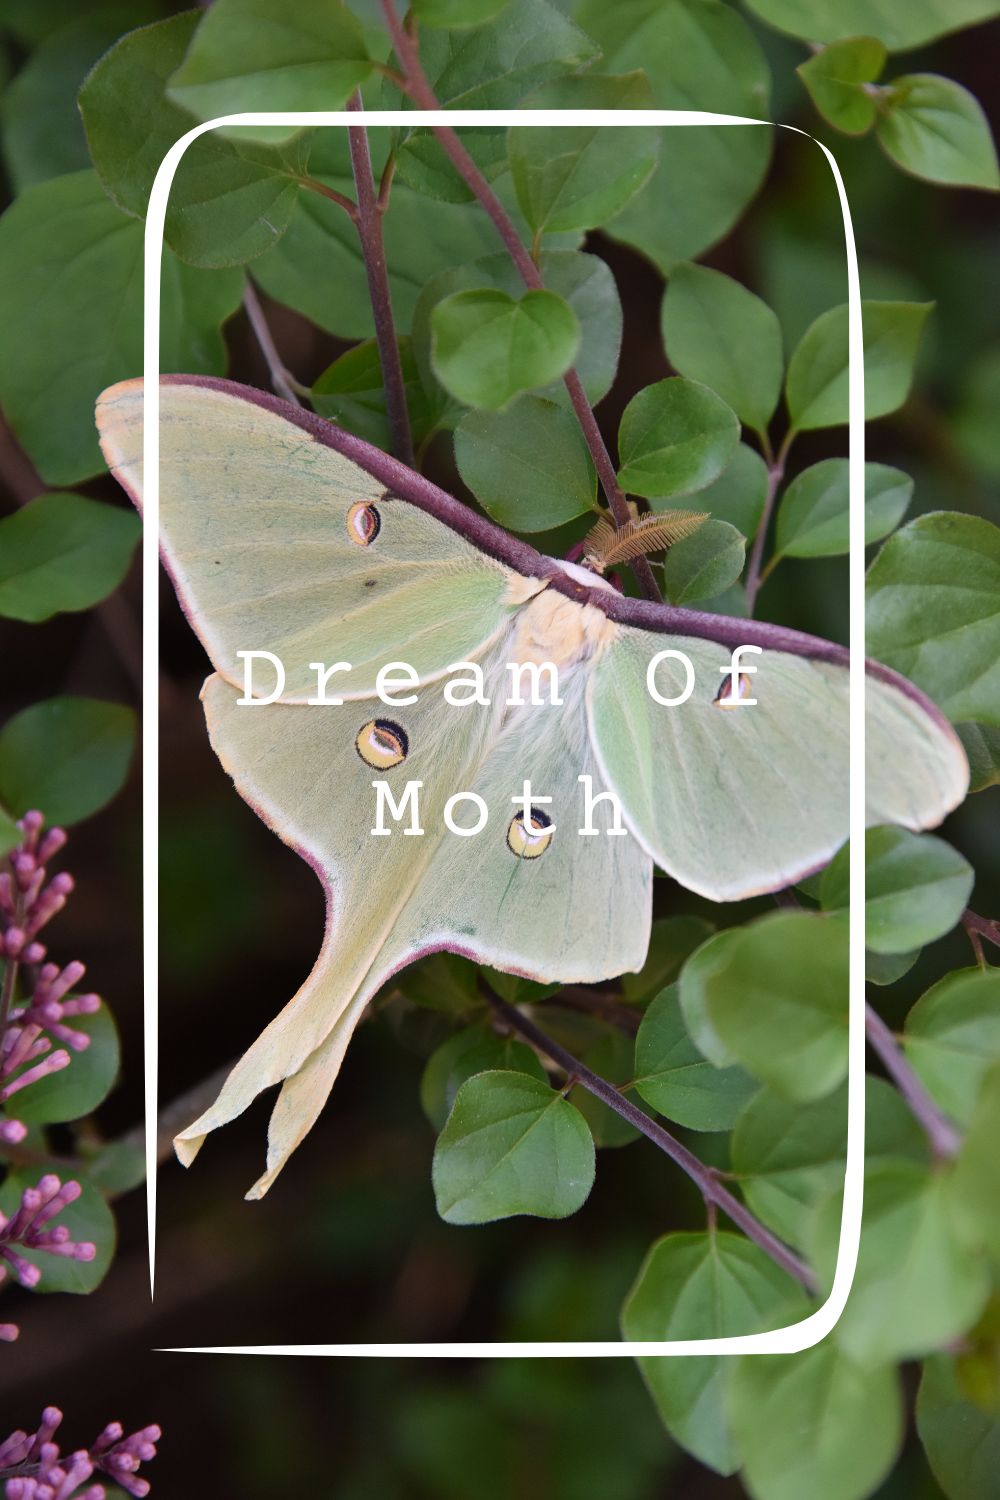 Dream Of Moth Meanings 2